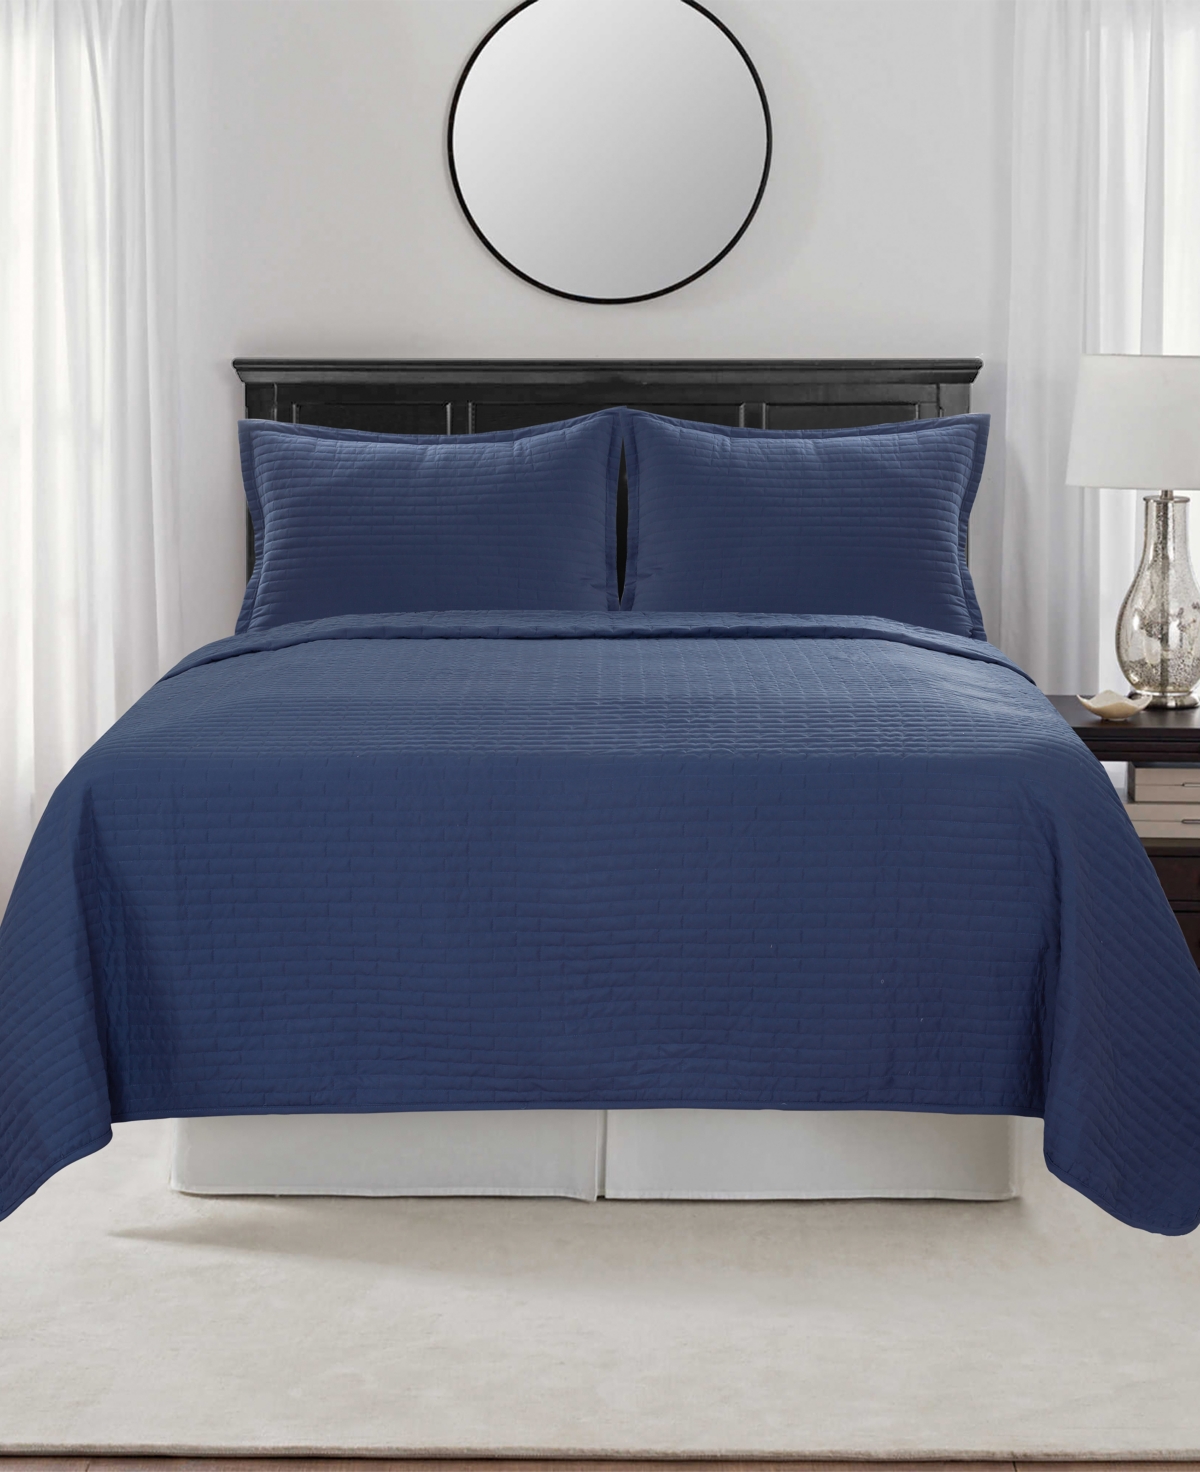 Videri Home Brick Quilted Coverlet, Full/queen In Navy